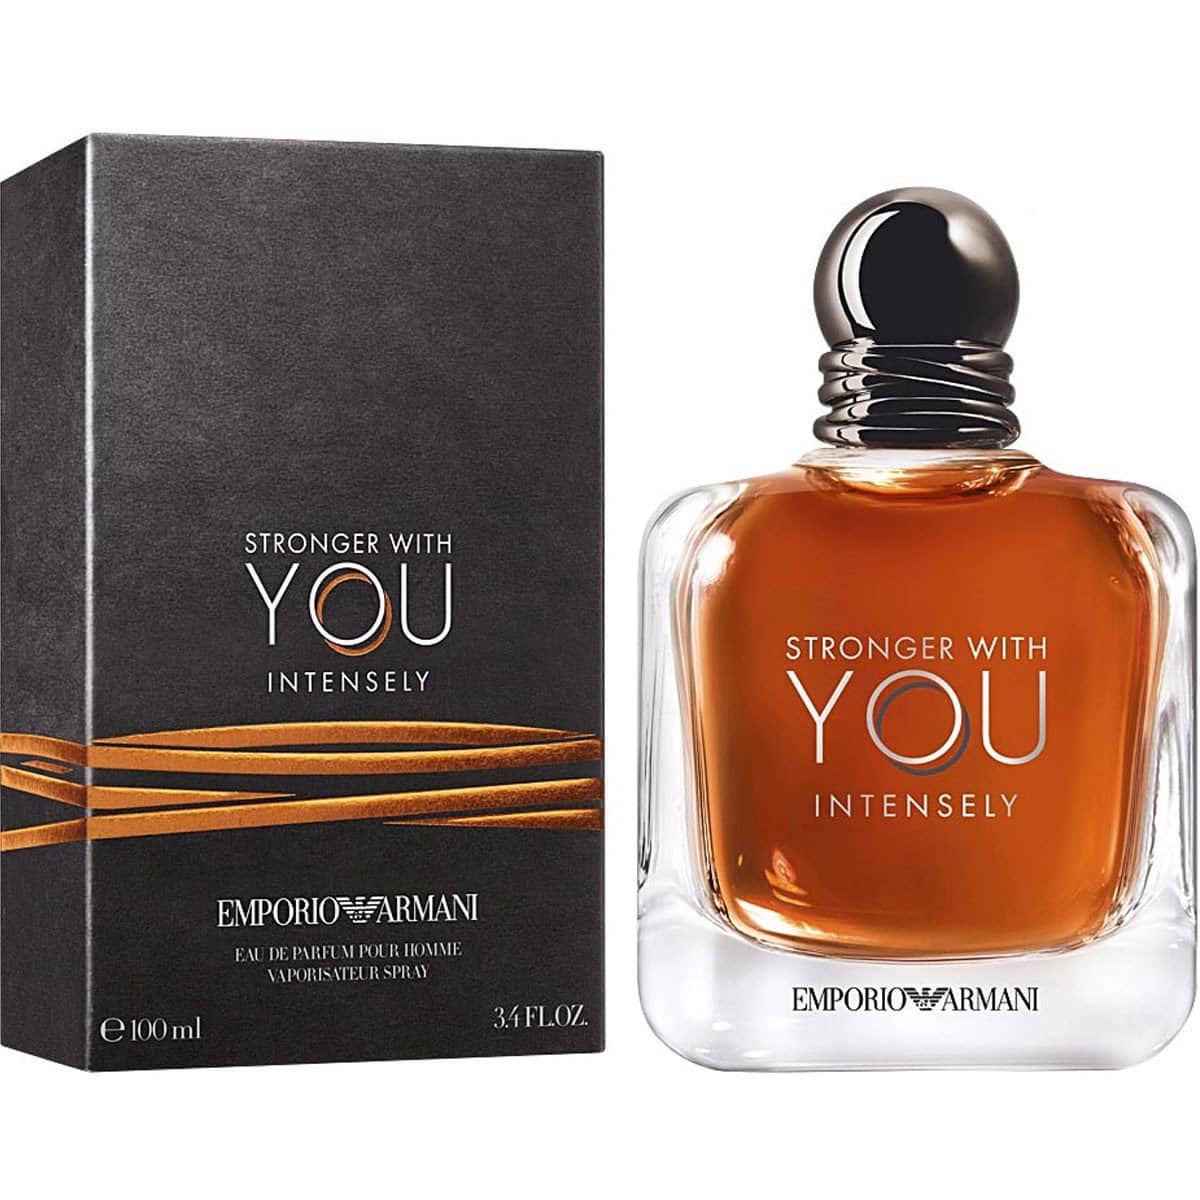 Arriba 39+ imagen armani stronger with you intense